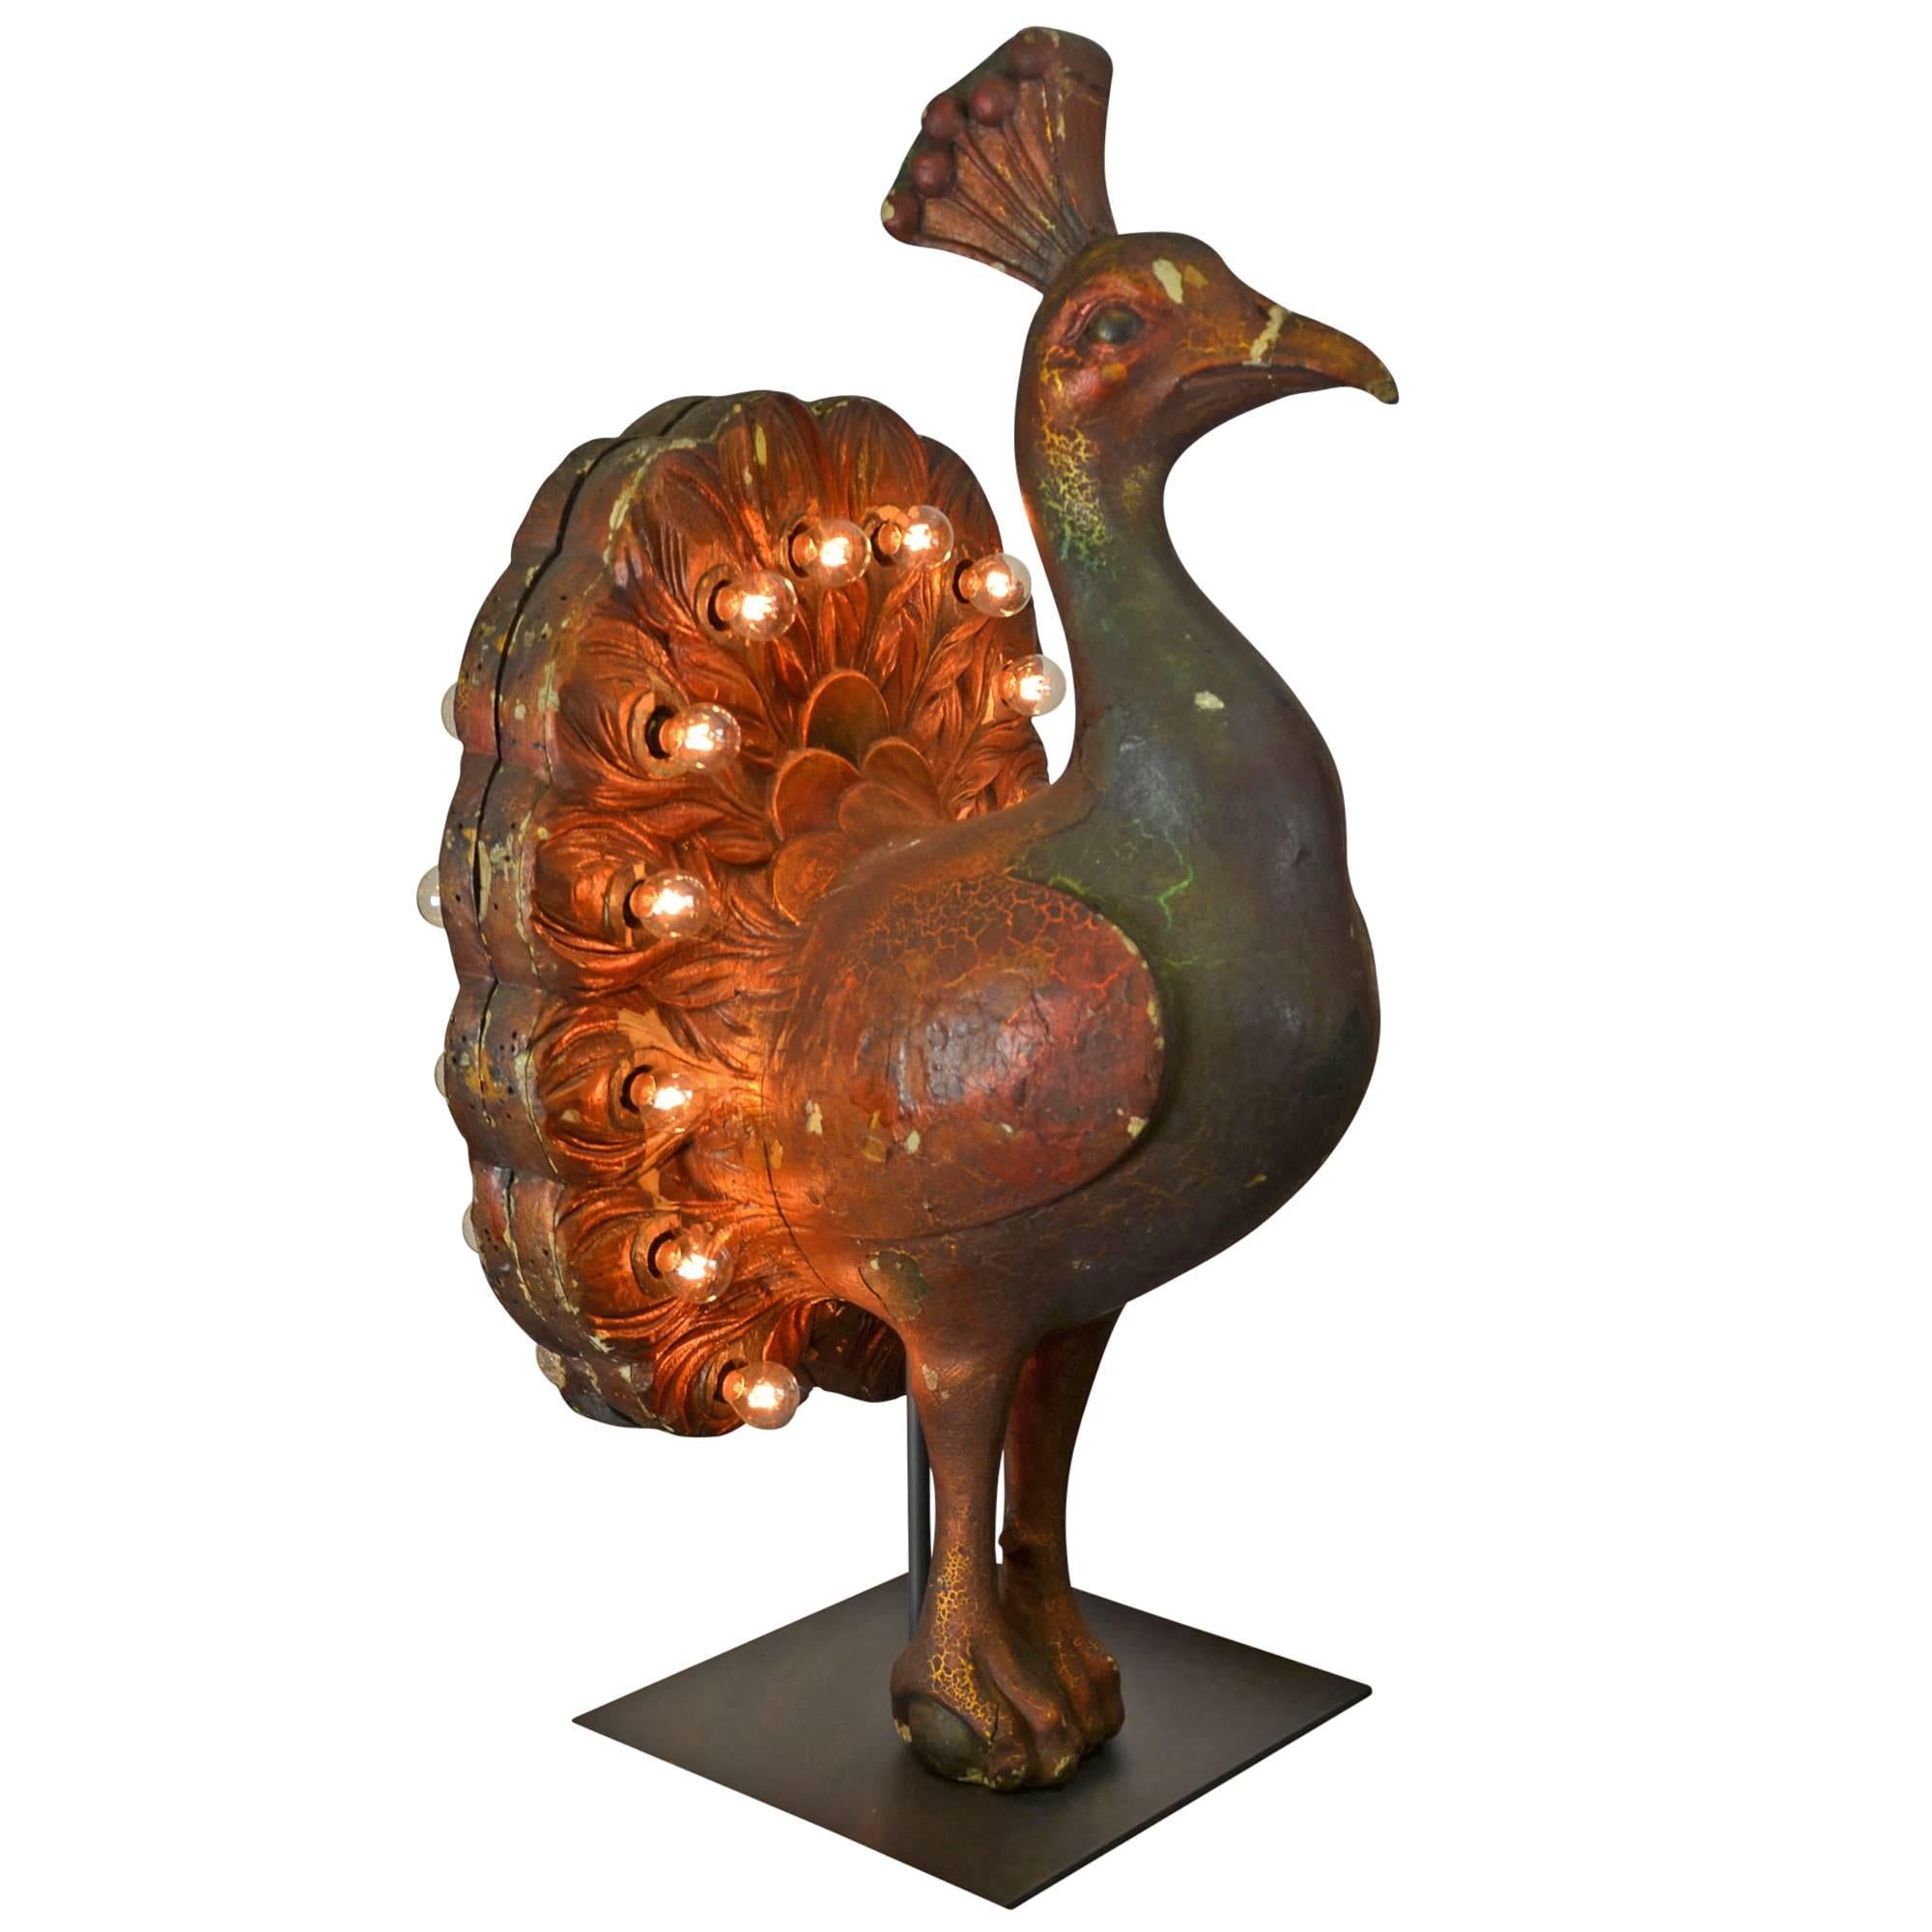 A rare bird, if there ever was one. Completely unique and one of the most unexpected finds we've ever come across, we believe this piece to have been the focal point to a carousel in its day. Hand-carved from wood and outfitted with 28 bulbs